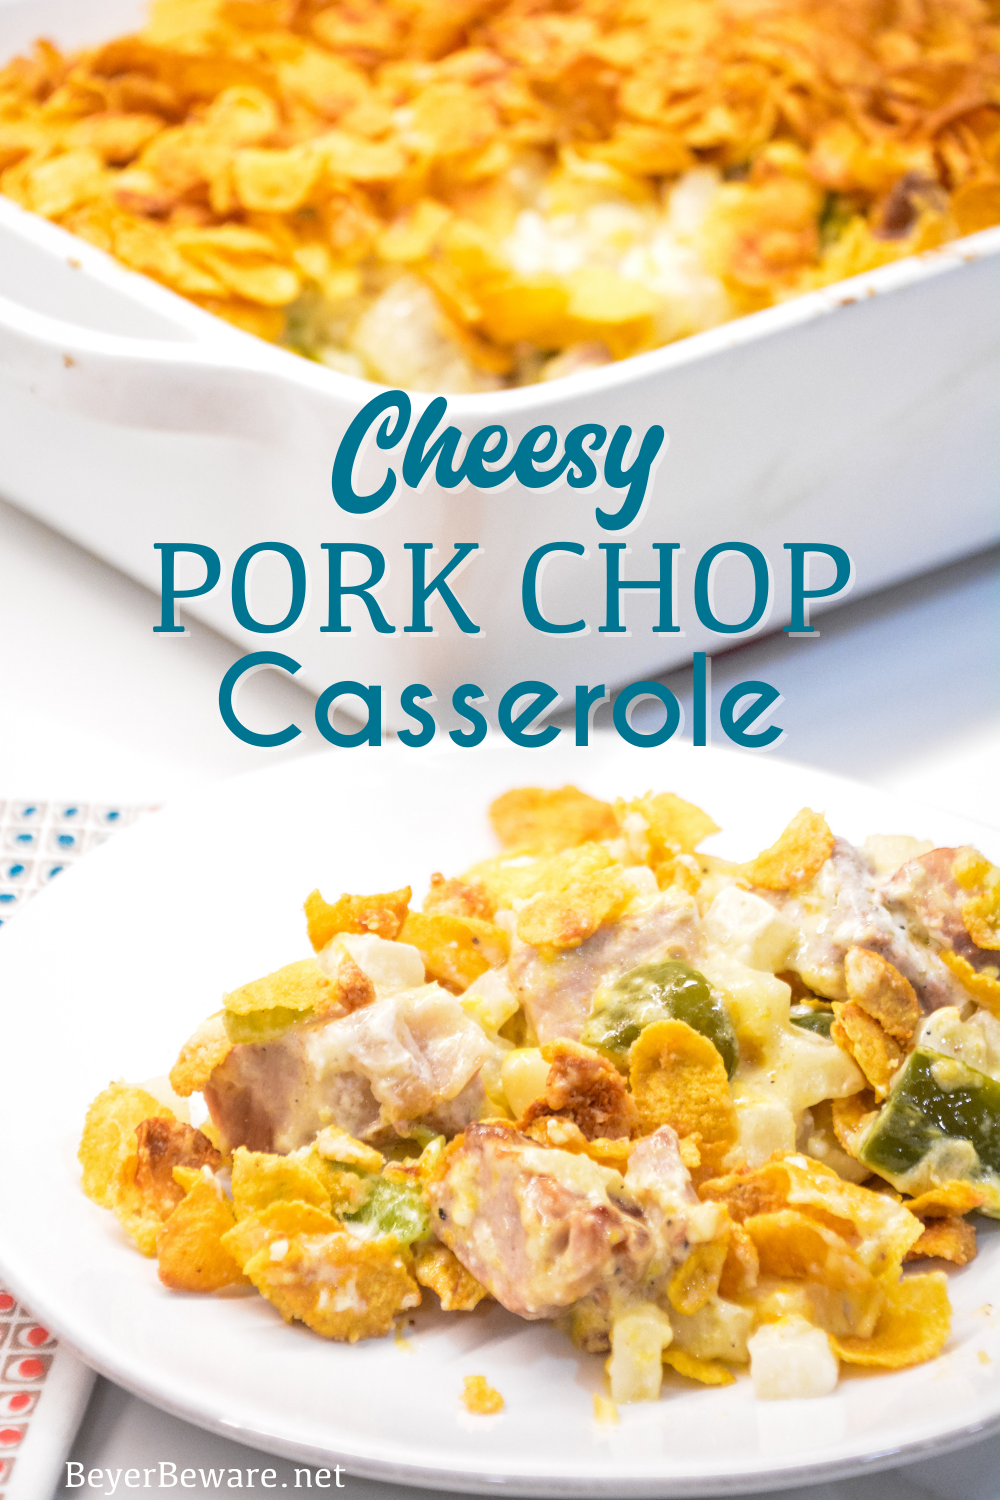 Cheesy pork chop casserole is the perfect way to use leftover pork chops and is a great recipe to sneak extra veggies and beans in your kid's diets.